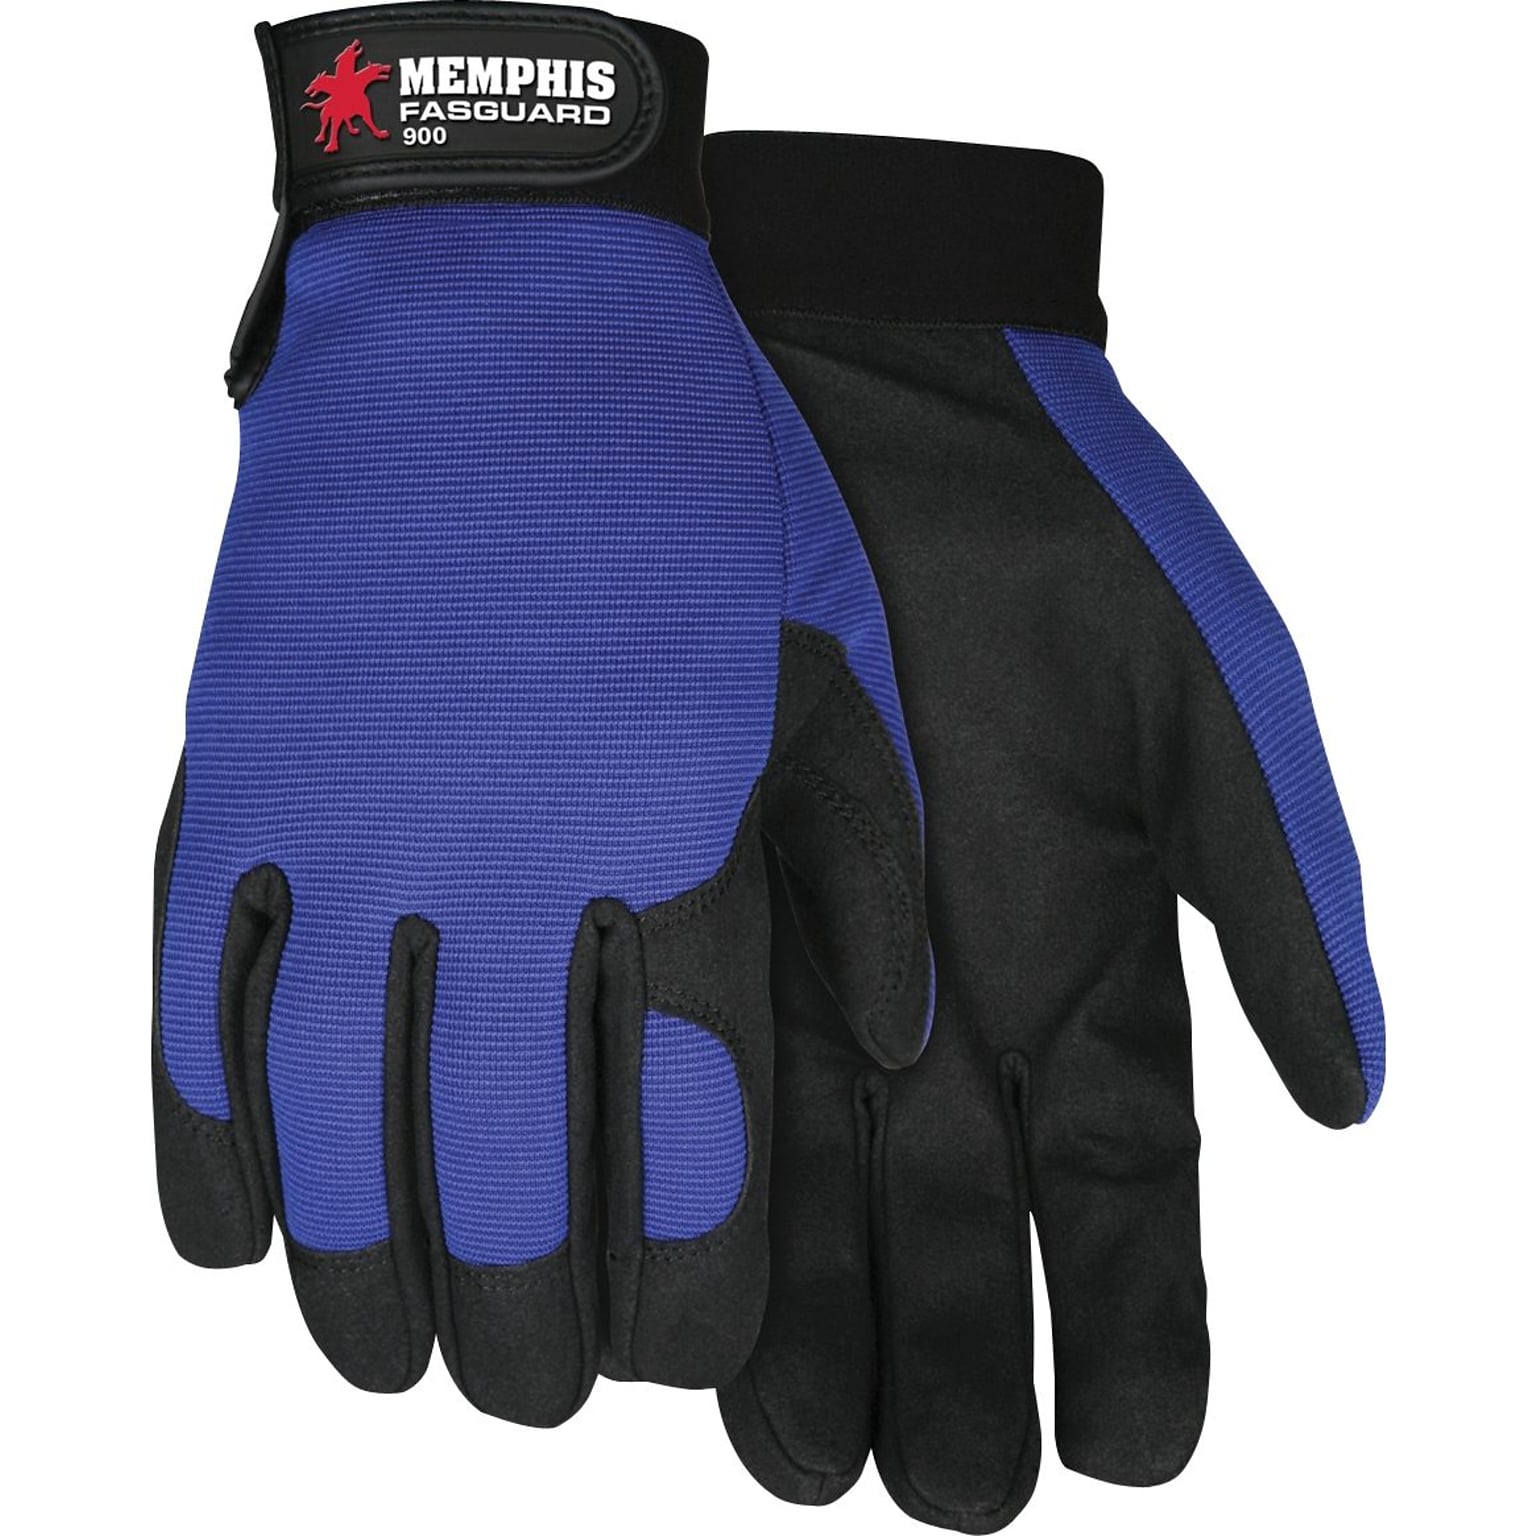 Memphis Gloves® Fasguard™ Clarino® Synthetic Leather Palm Multi-Task Gloves, Blue/Black, Extra-Large